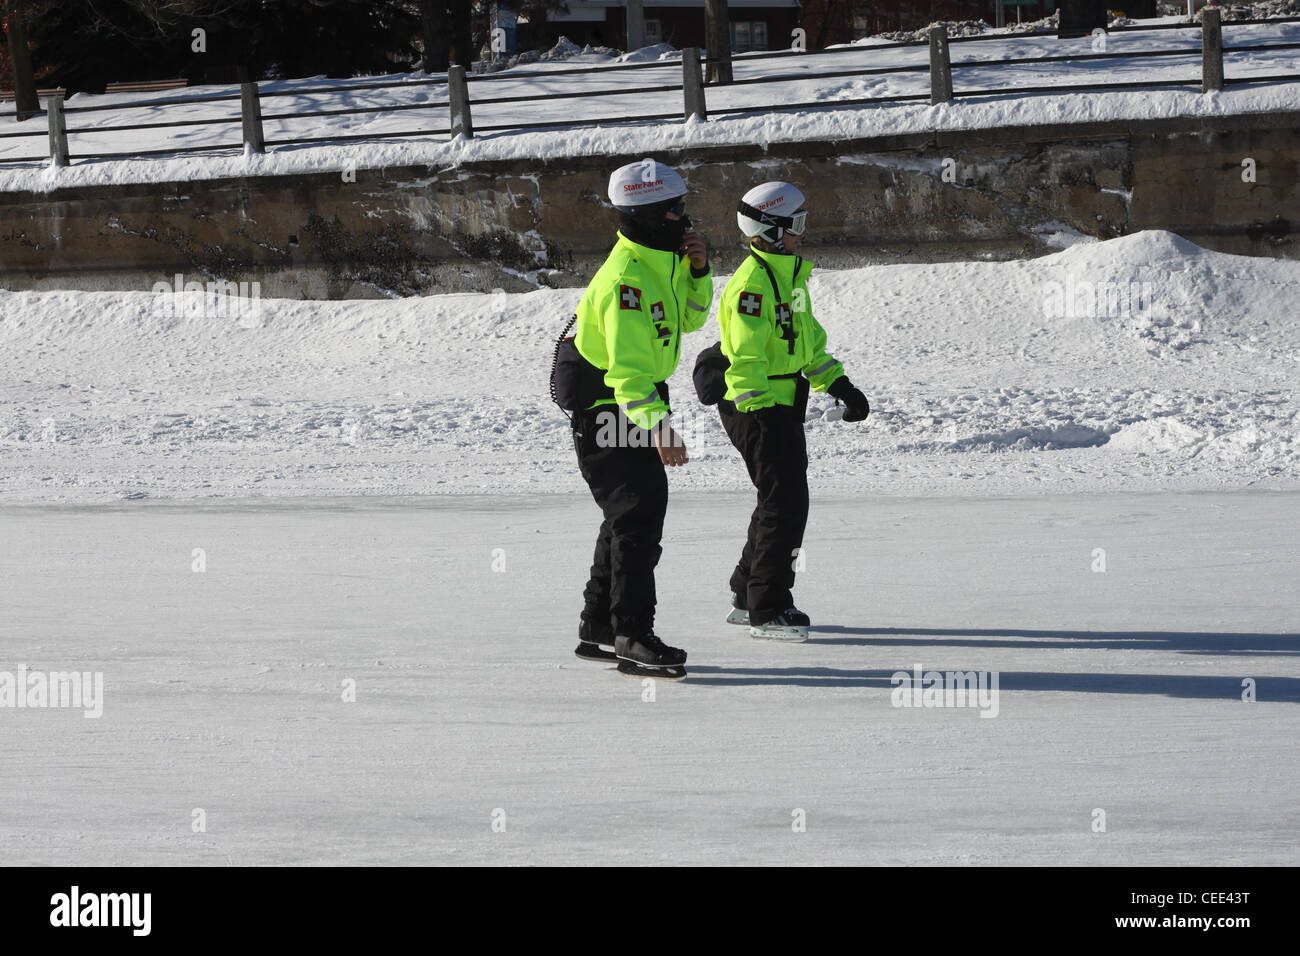 Two skaters in reflective coats and white helmets Stock Photo